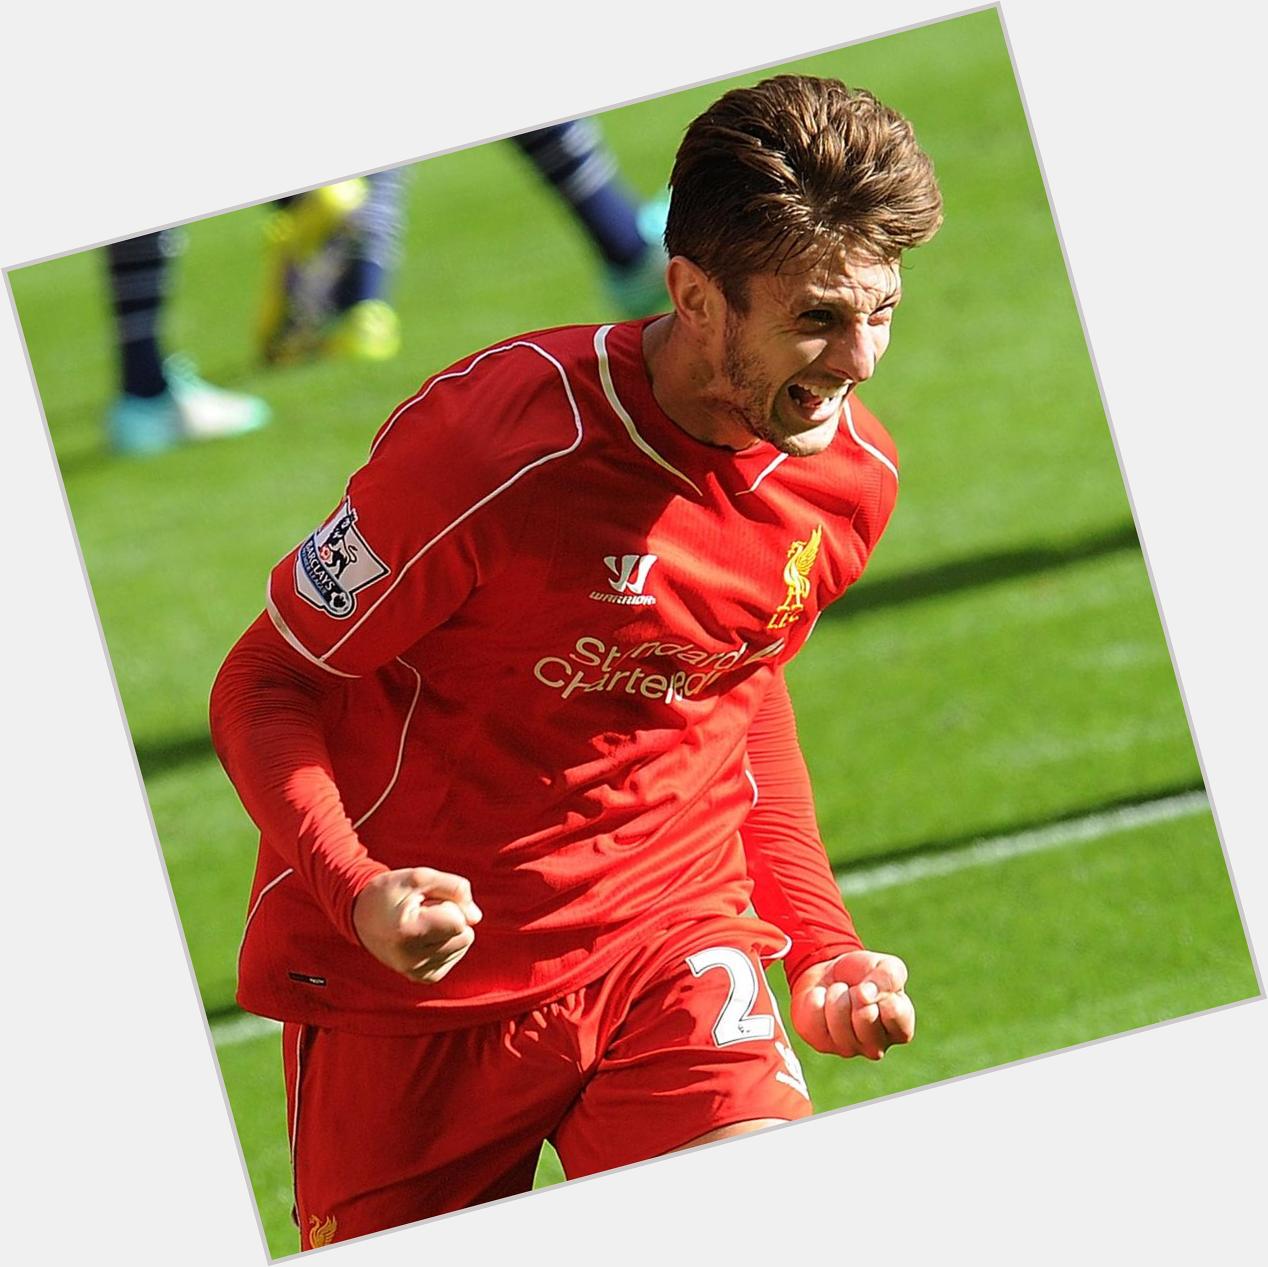 Happy 27th birthday adam lallana. Hope you can enjoy your birthday with a win today 